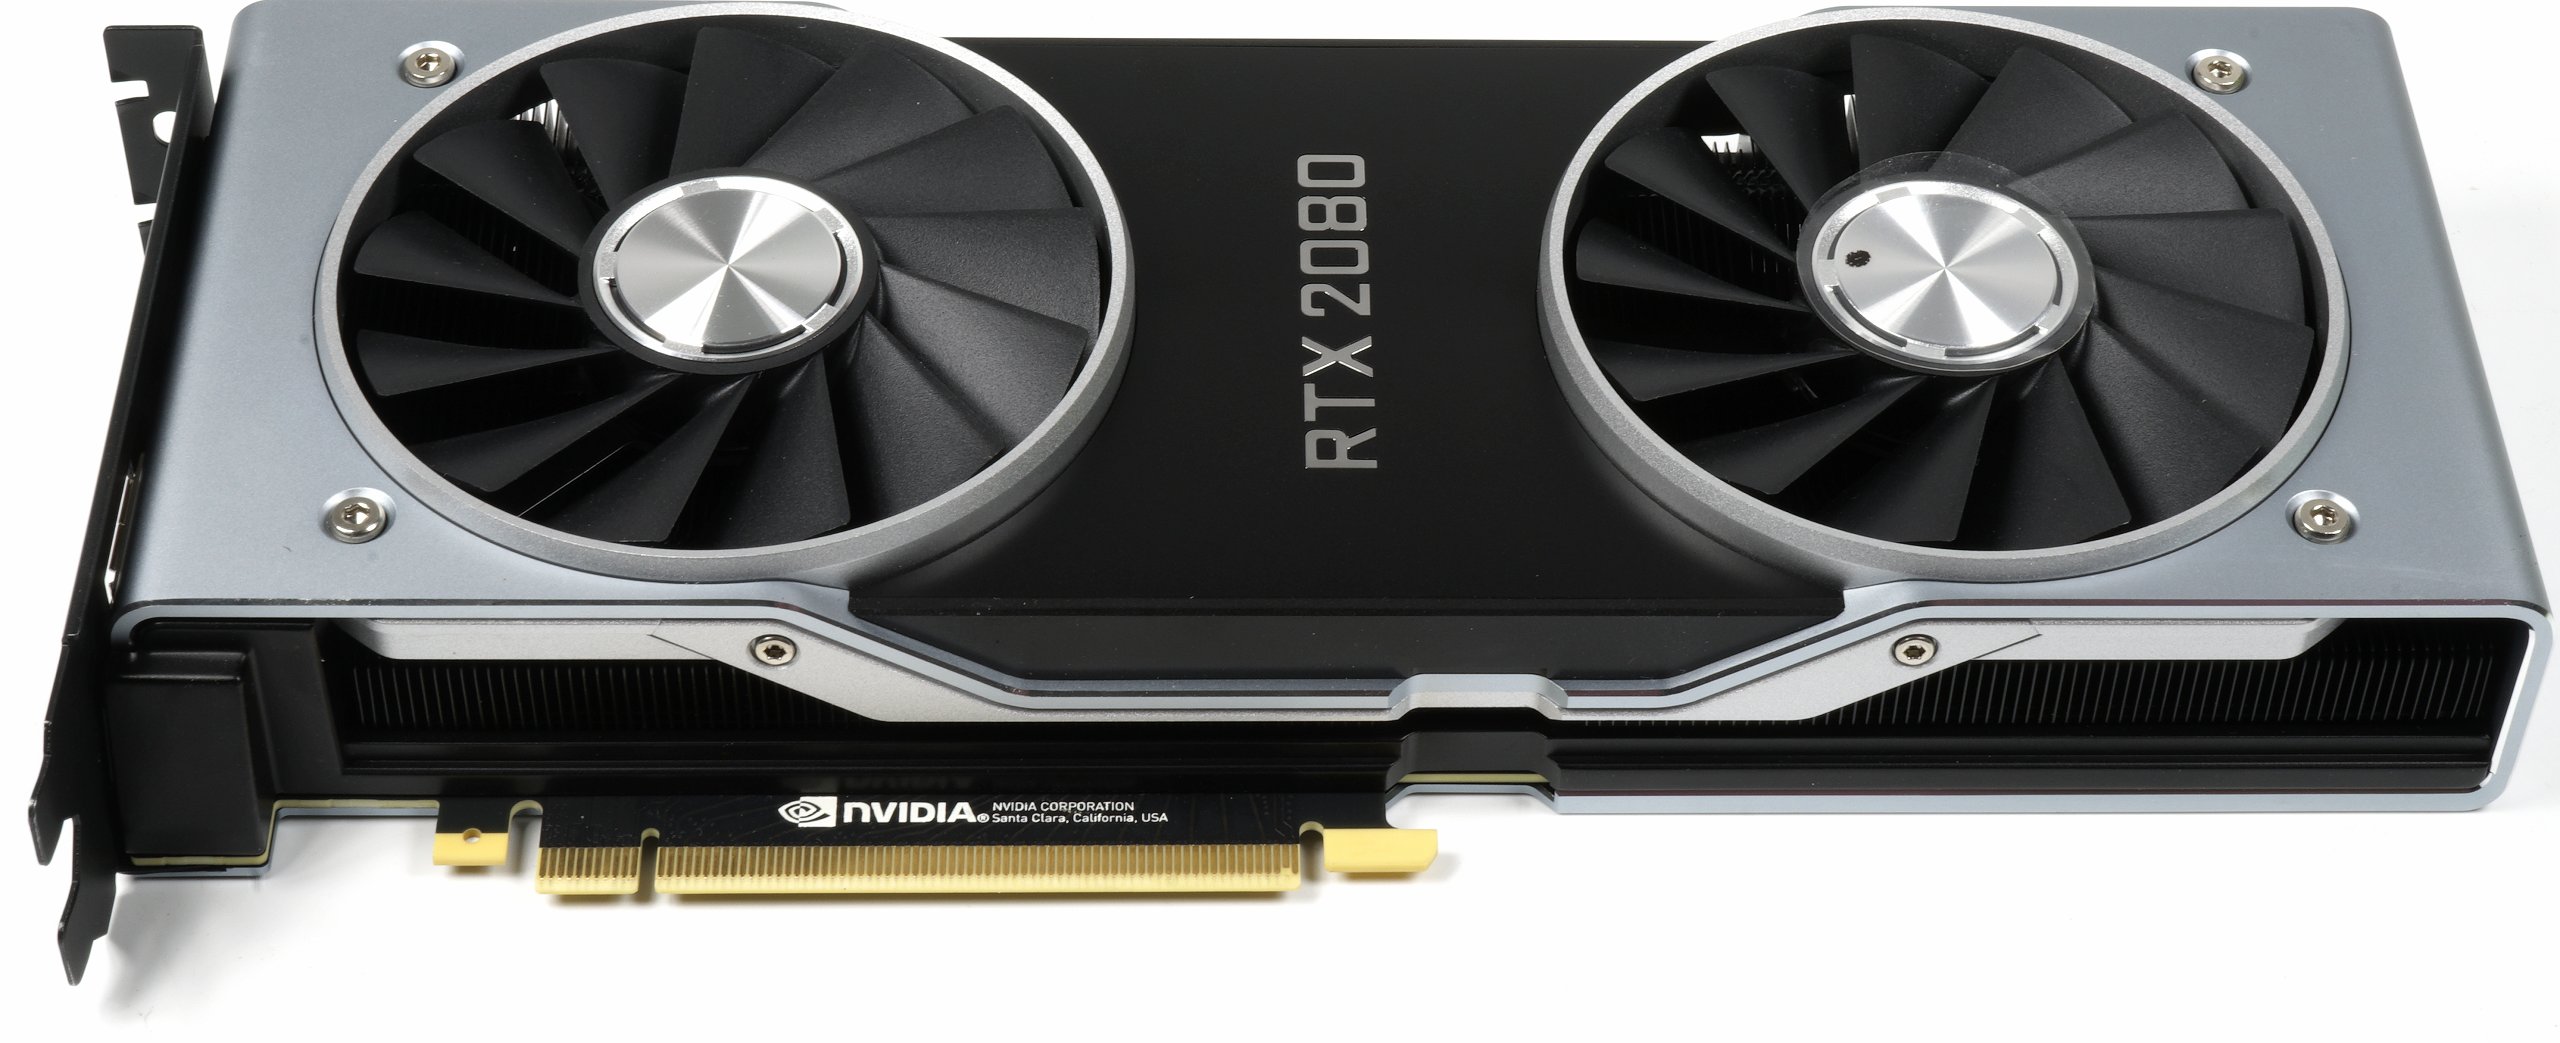 IgorsLab] Turing reloaded as a stopgap? Several board partners ready to  produce GeForce RTX 2060 again : r/hardware